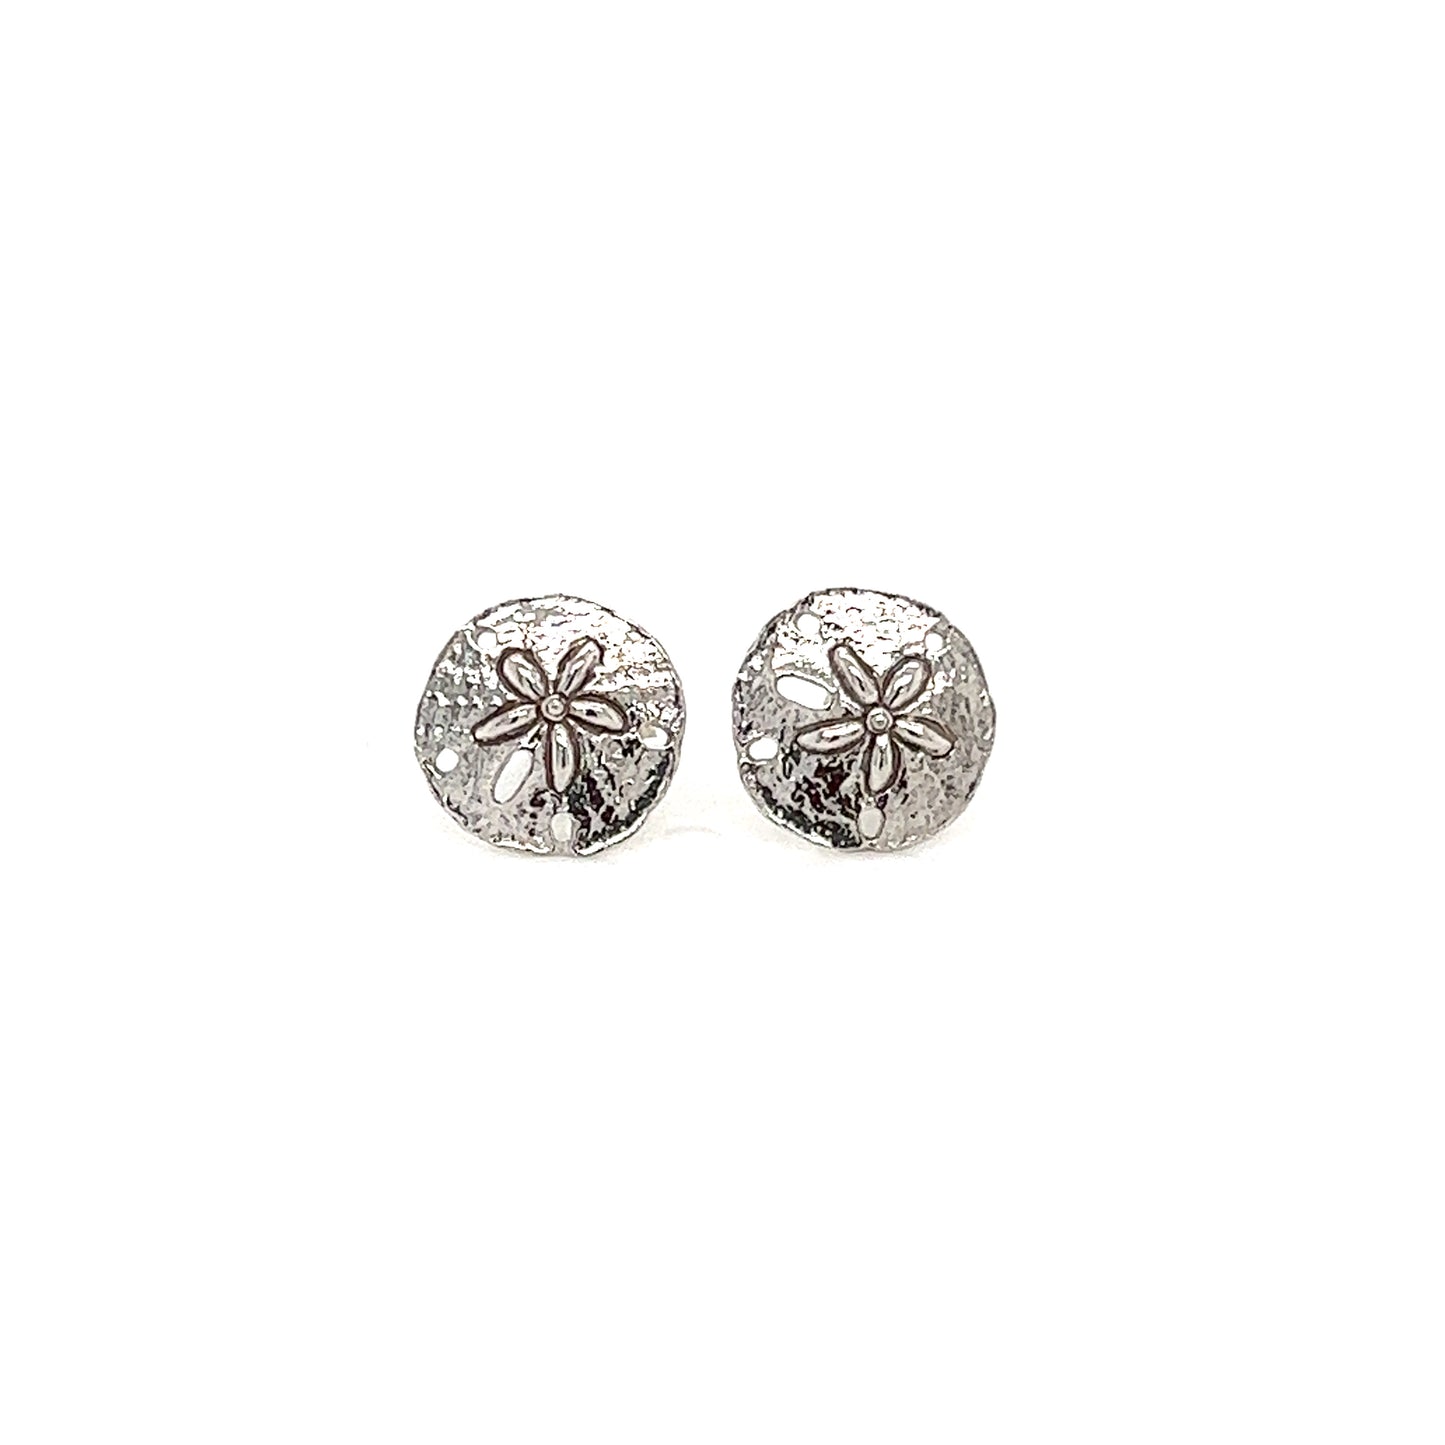 Sand Dollar Stud Earrings in 14K White Gold Front View